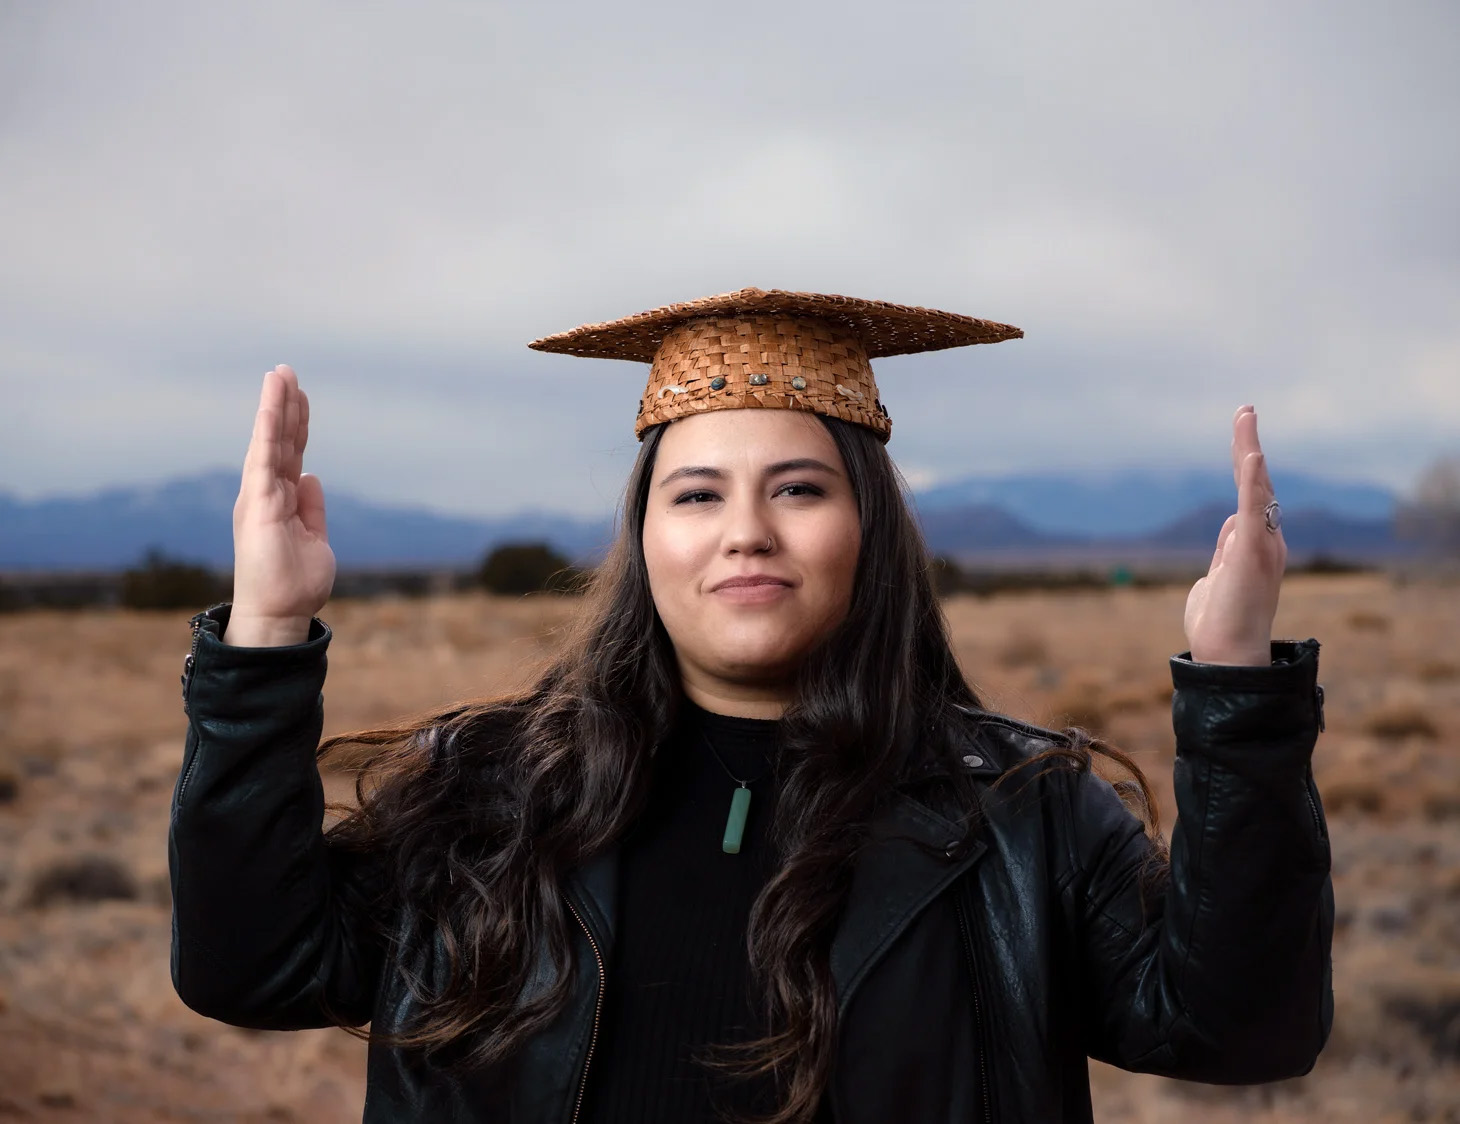 a young person with straight black hair wears a basket-weave mortarboard hat and holds their arms out with hands up and elbows at right angles. Their hands face inwards toward their head.